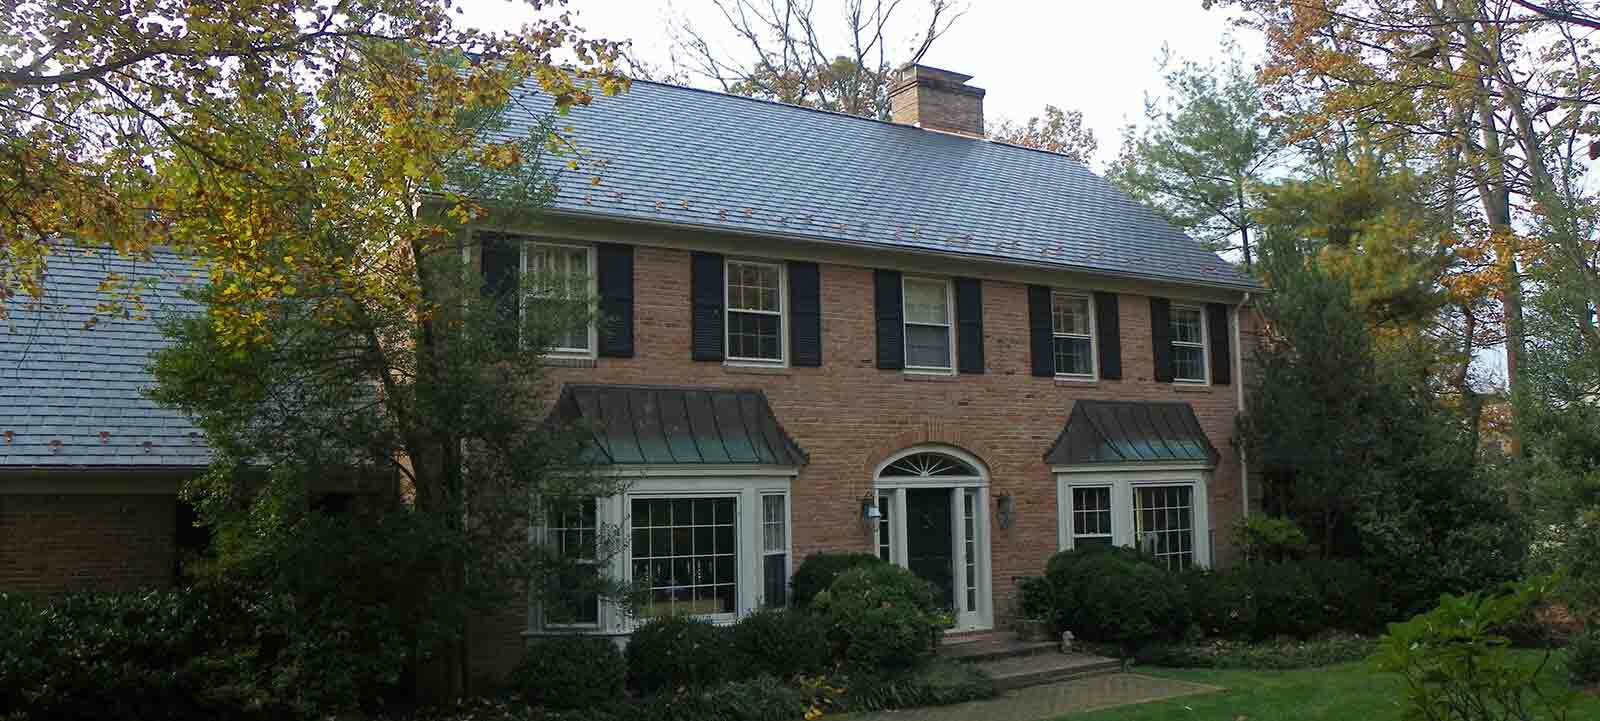 Residential Roofing in Daleview Dr Mclean VA